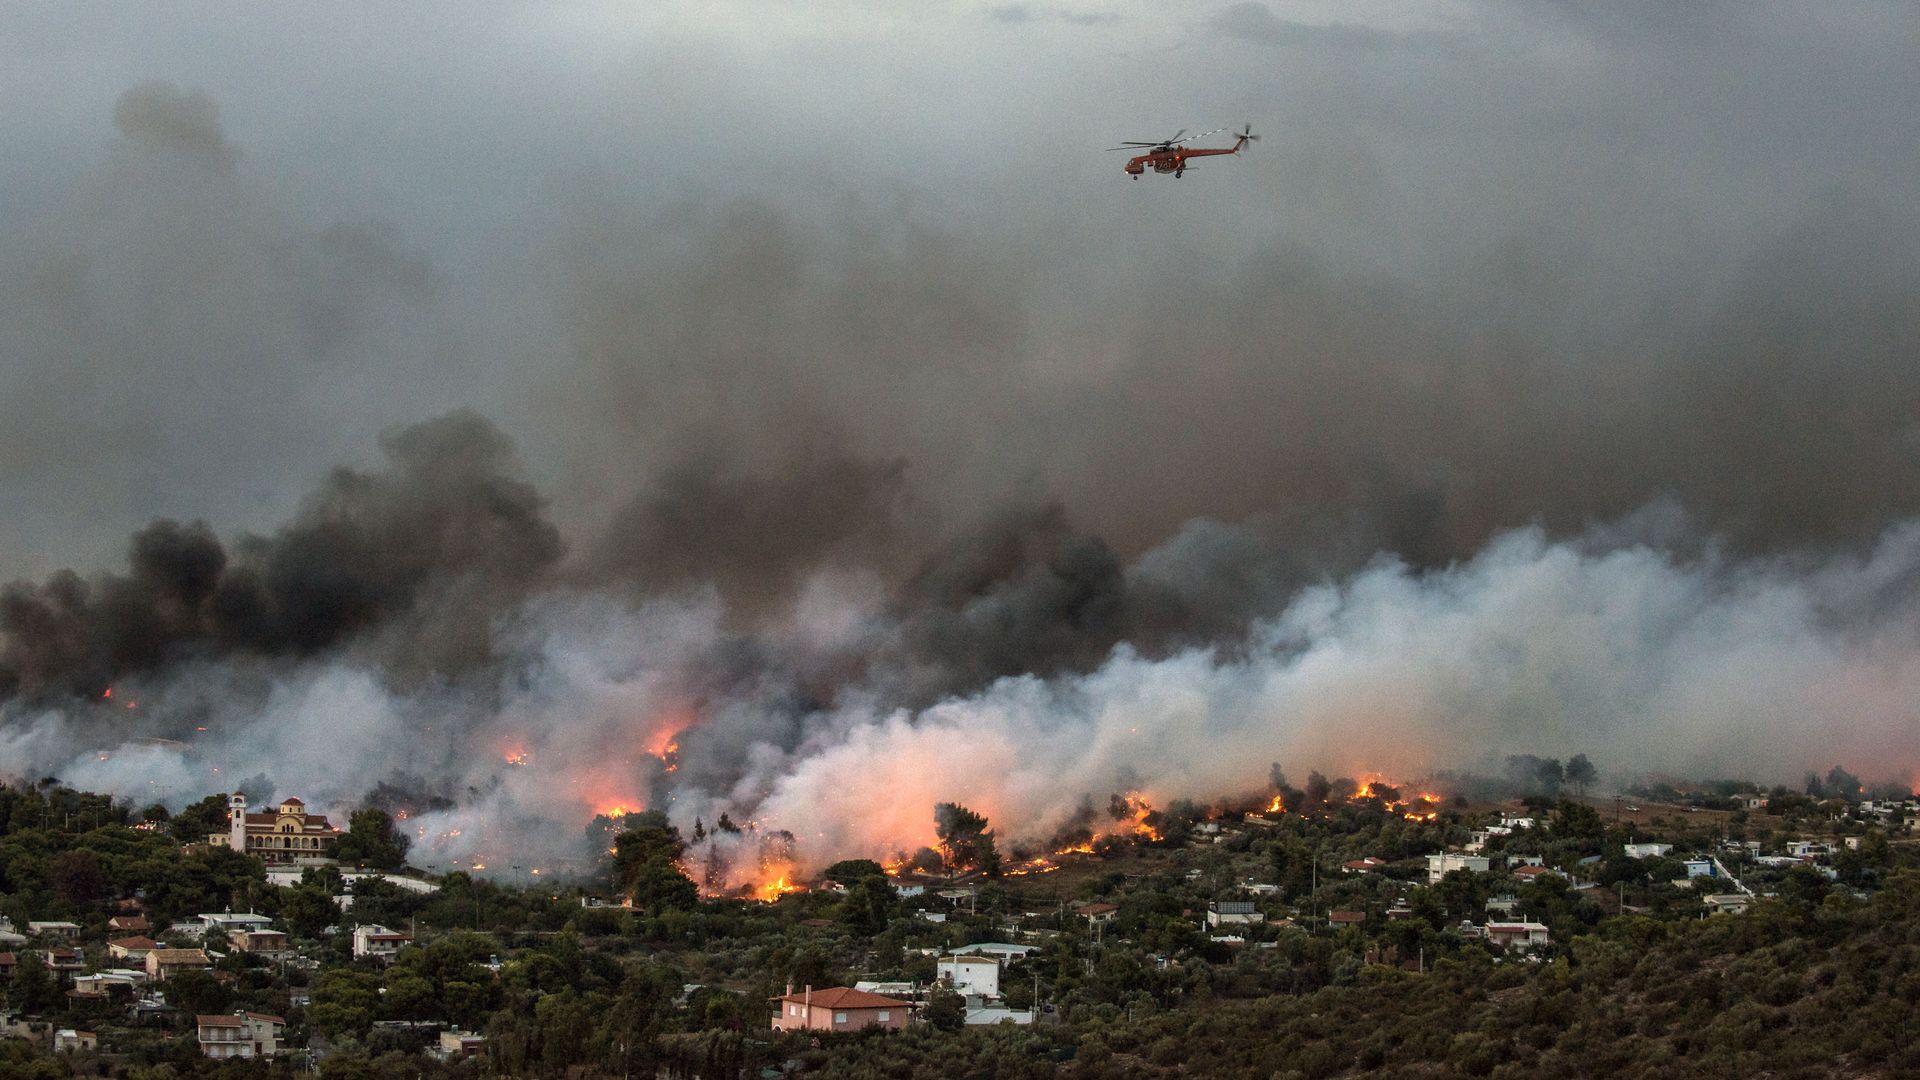 Helicopter flying over wildfires in Greece